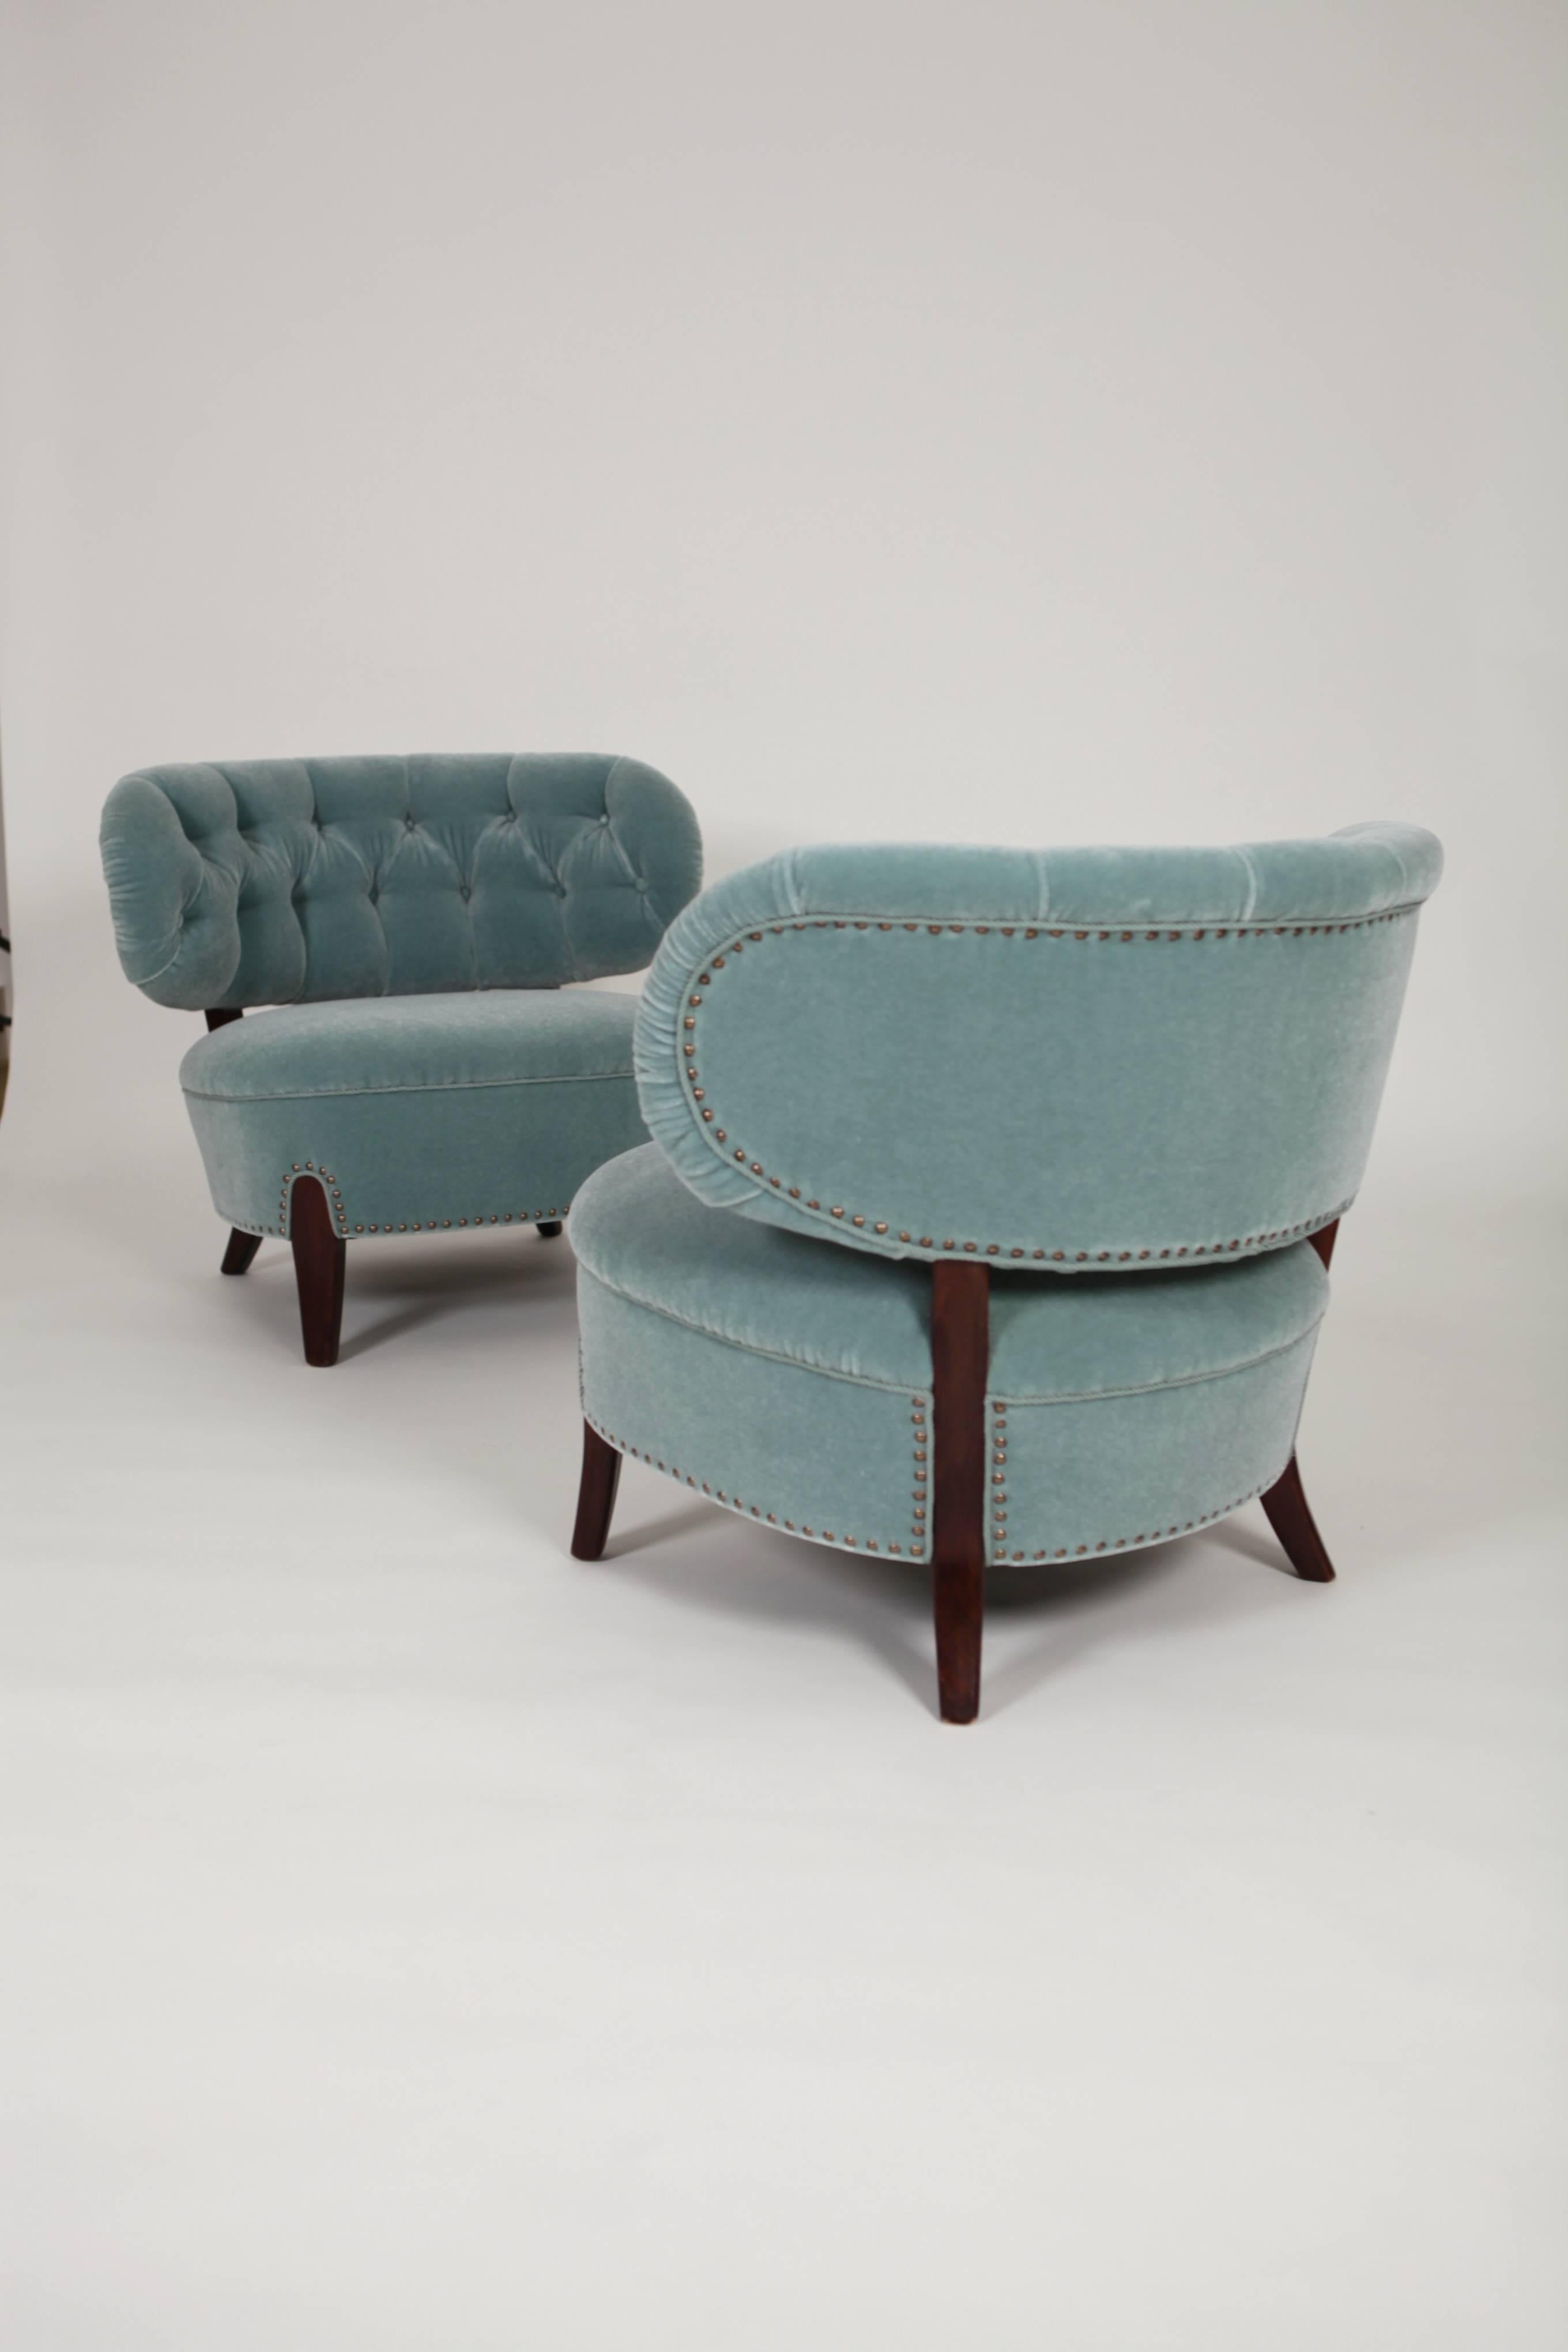 Swedish Otto Schulz Cocktail Chairs, 1940s